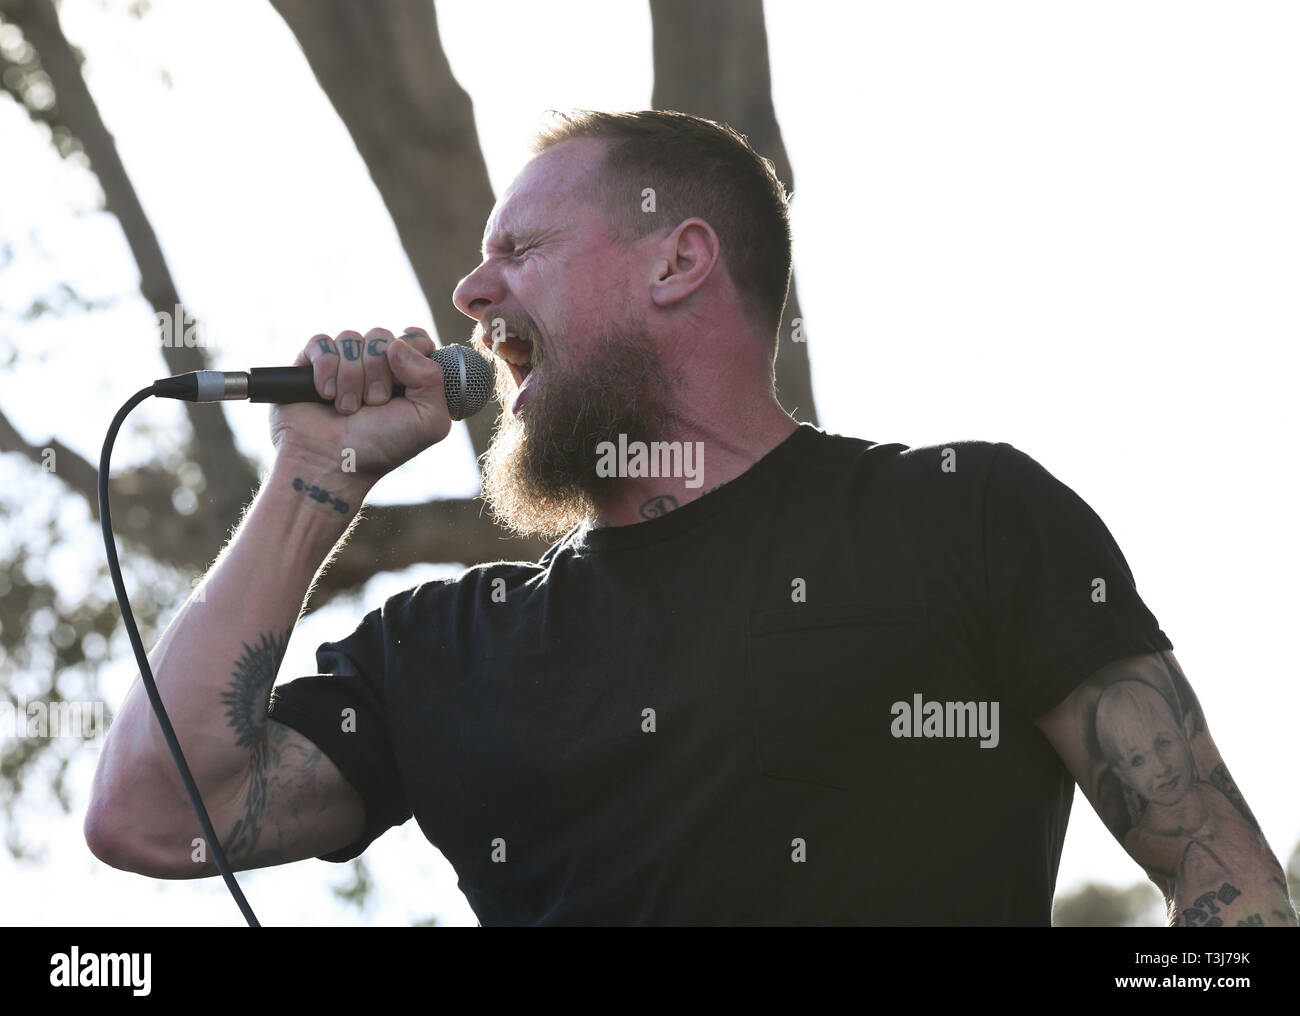 With Mike Vallely on Vocals, Black Flag Flies Again - Flagpole